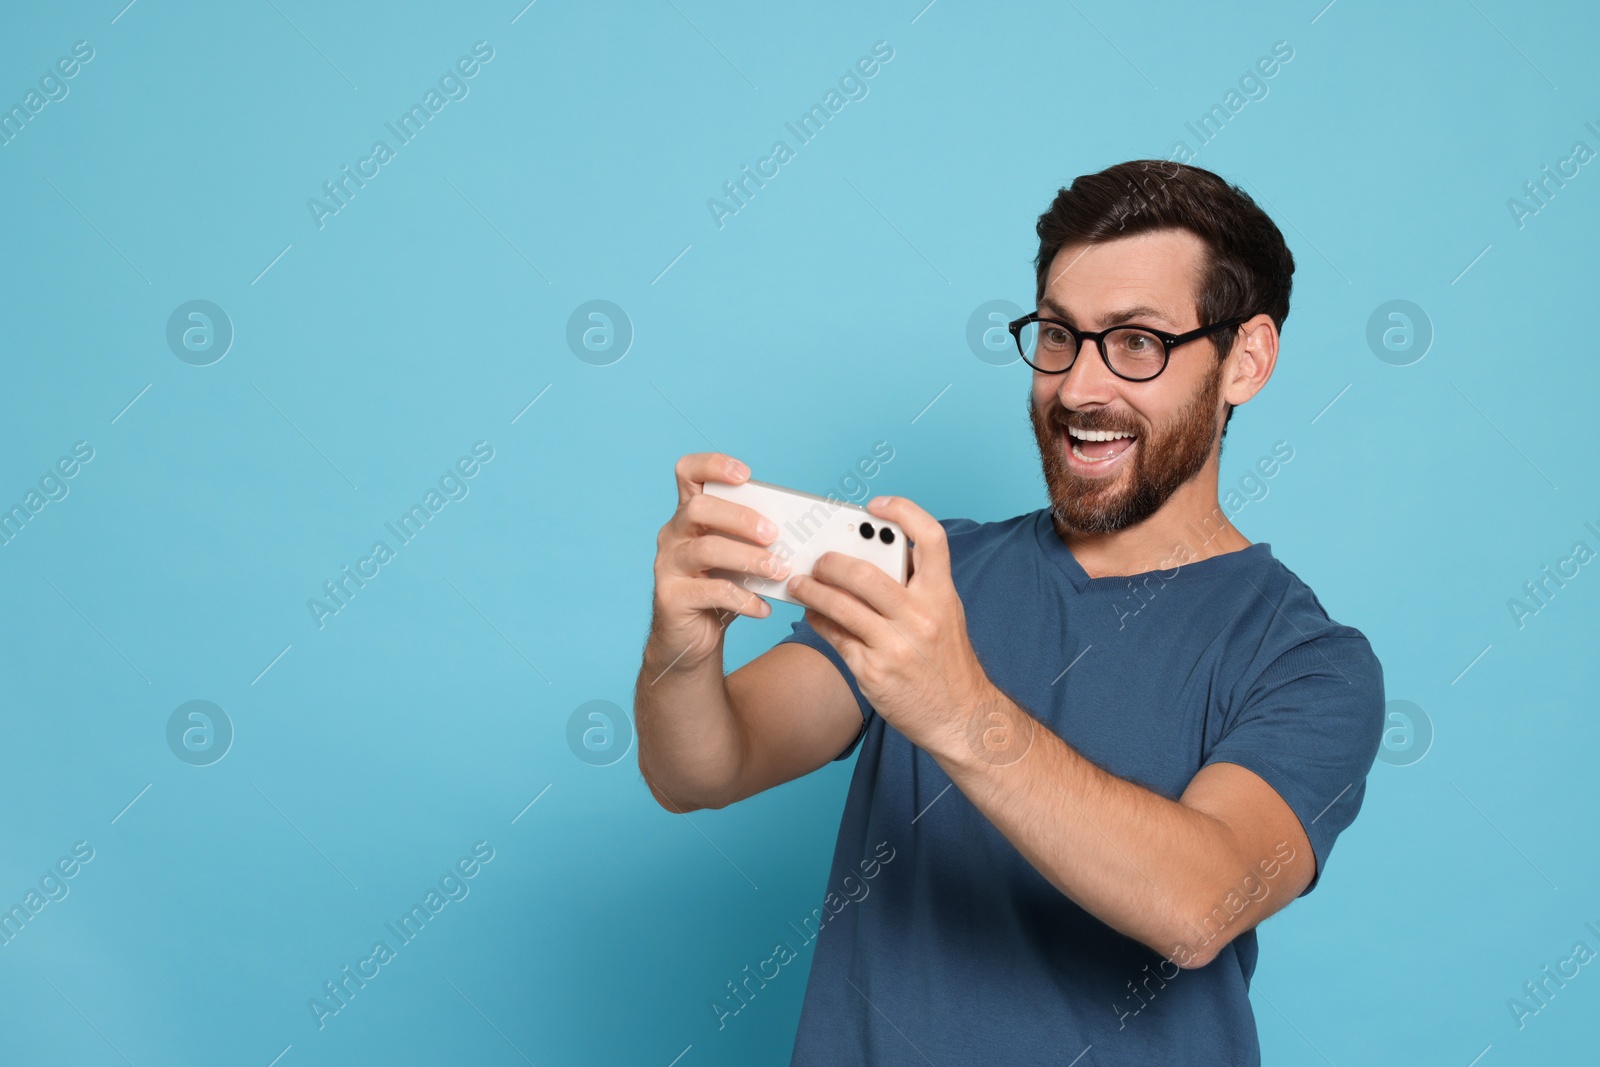 Photo of Emotional man playing game on smartphone against light blue background. Space for text